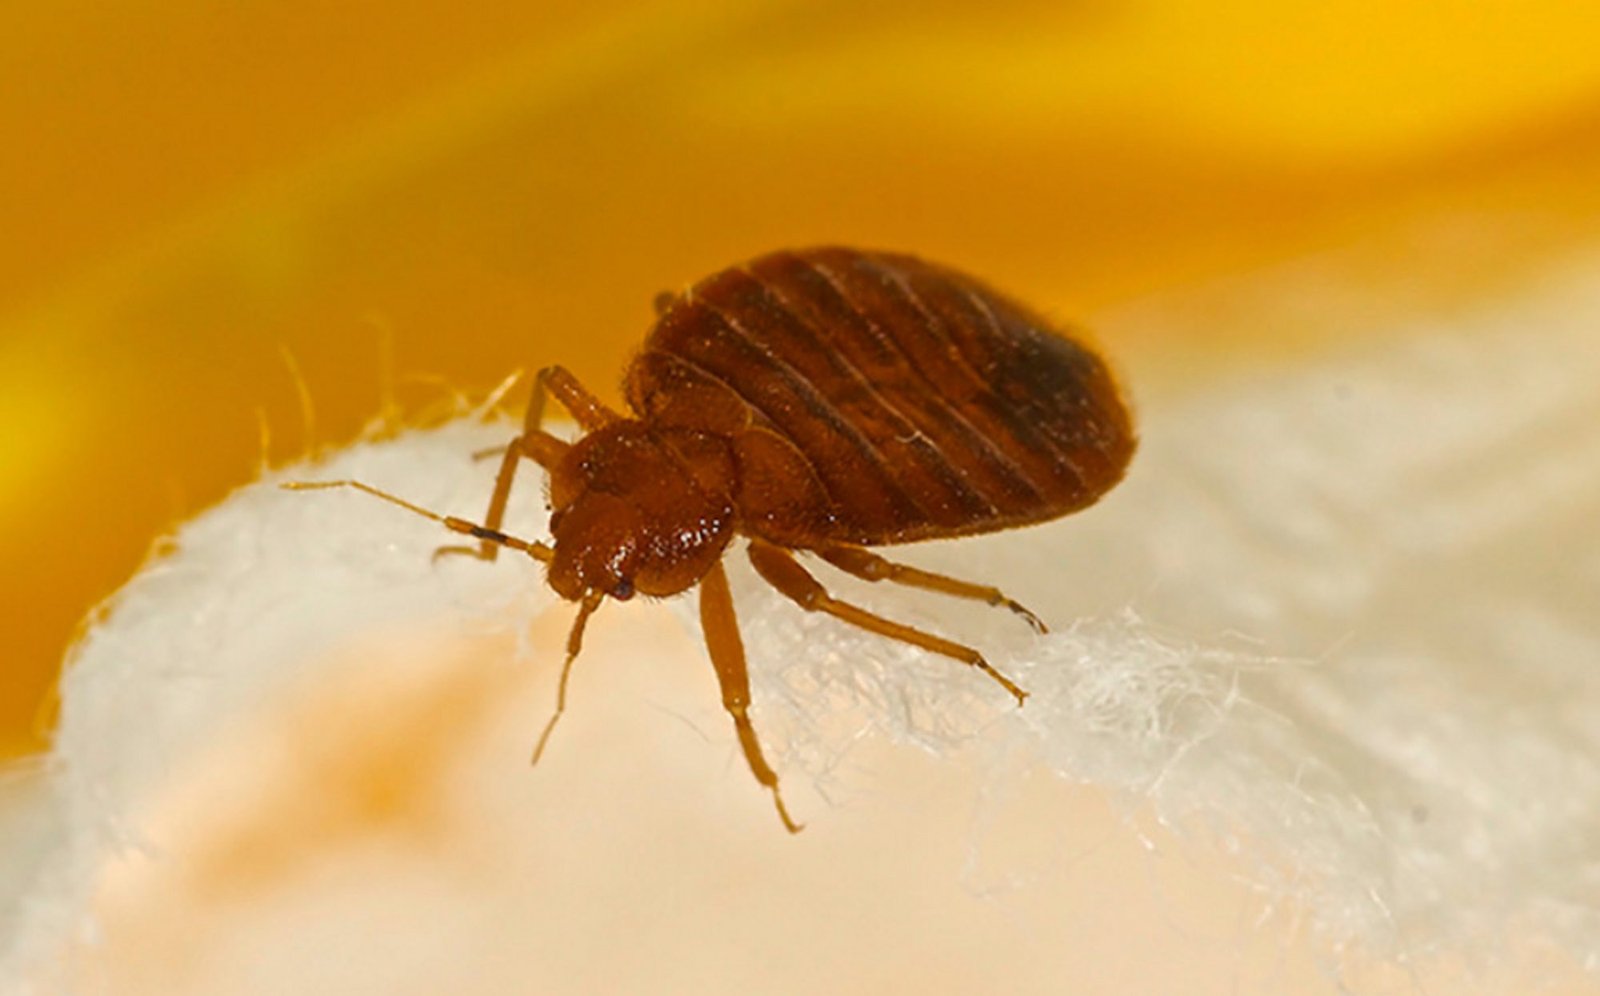 How to Prevent Bed Bugs from Spreading Into Your Home